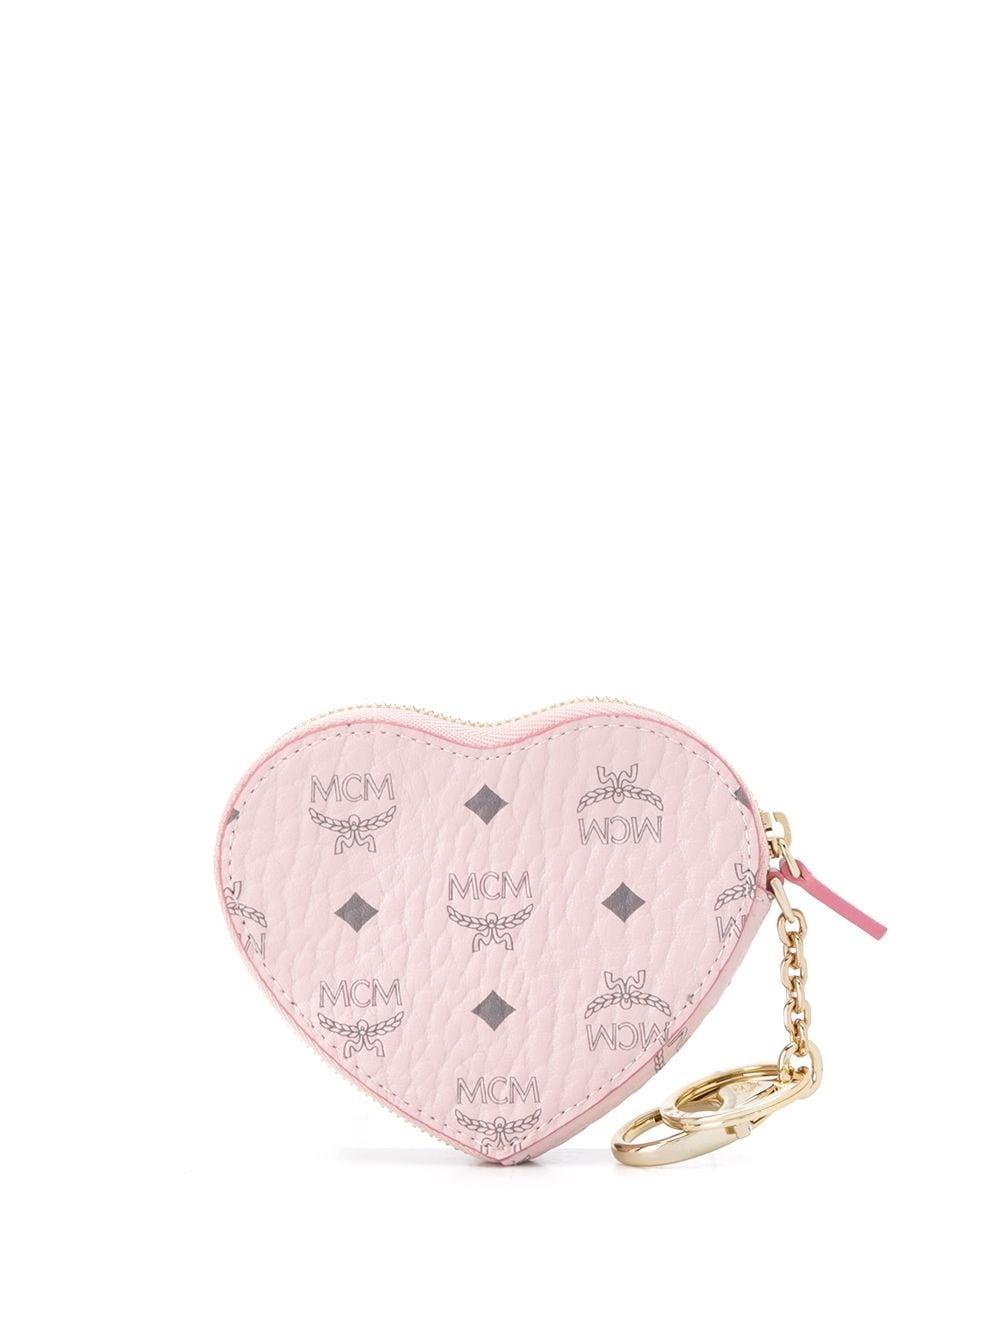 MCM Branded Heart Purse in Pink